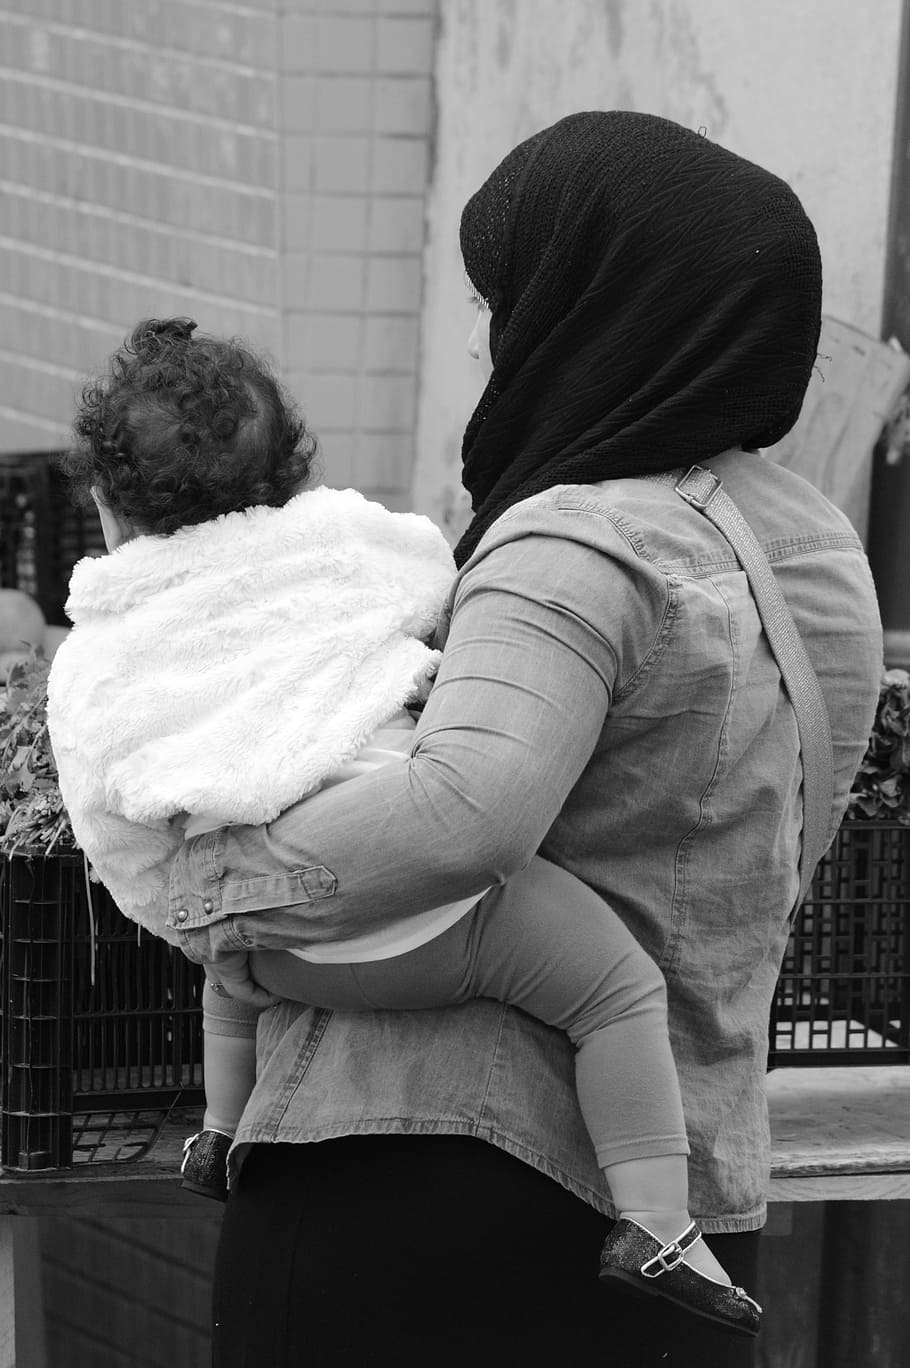 woman carrying baby, Woman, Child, People, Muslim, Kerchief, mother, two people, rear view, adult